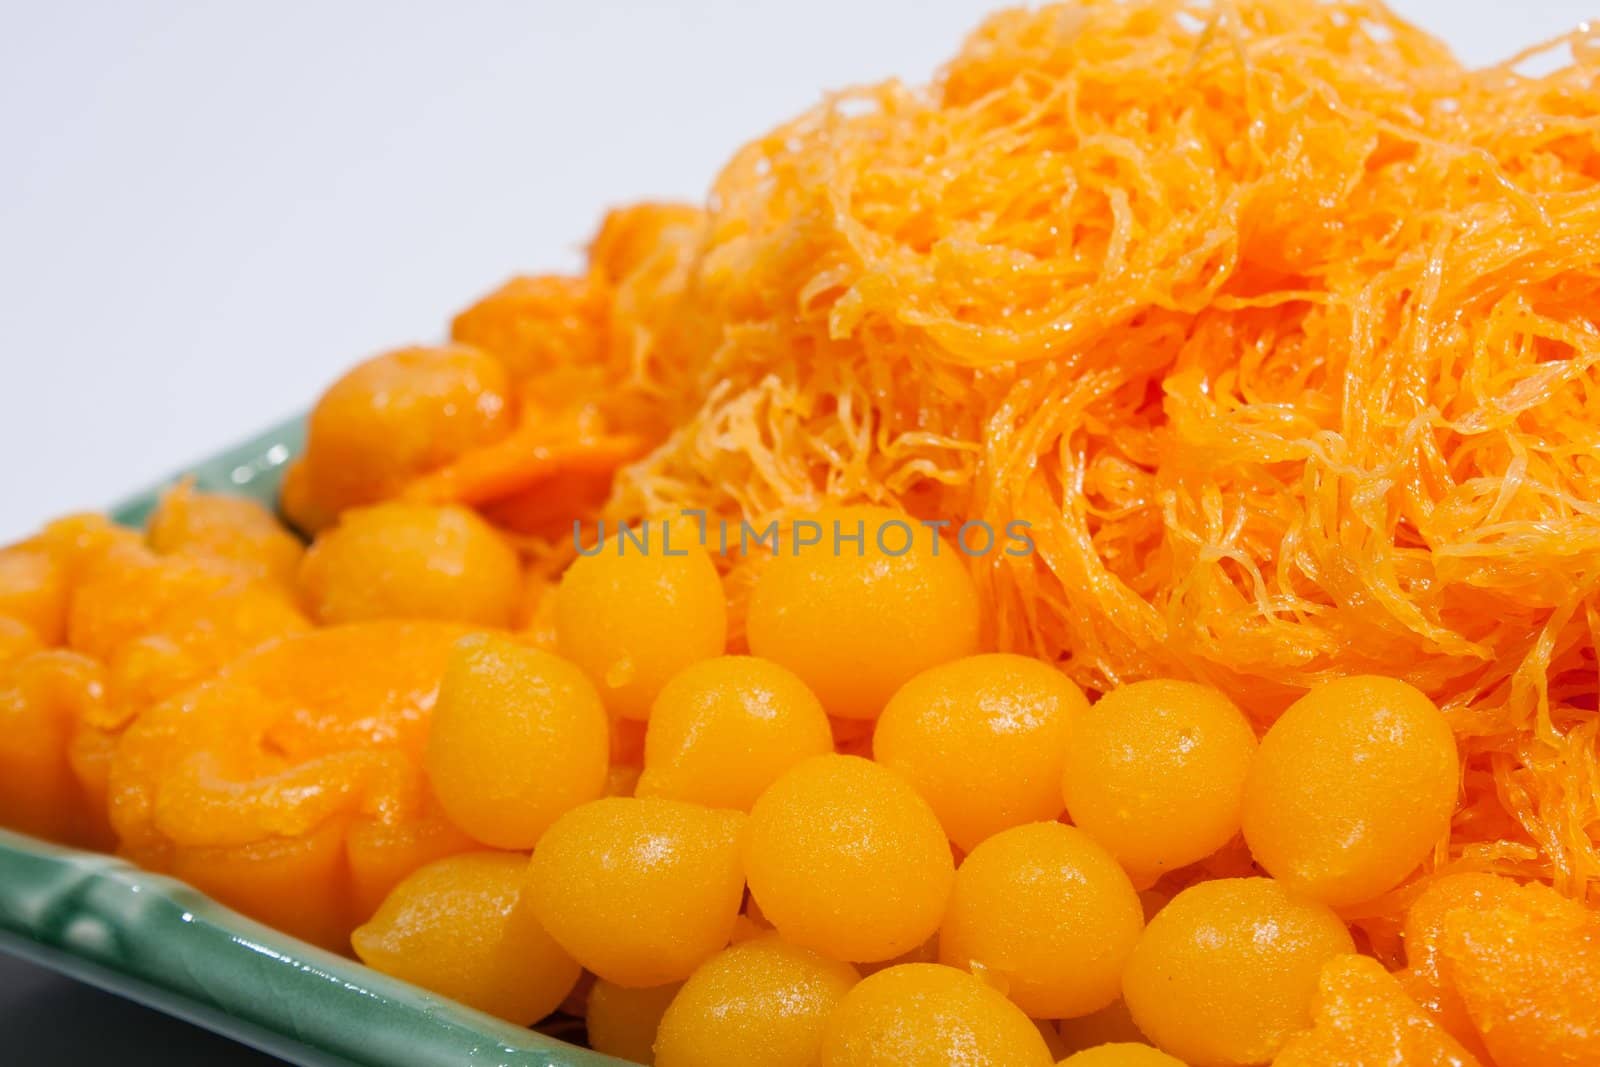 Thai desserts such as colorful beads �oidoong jackfruit etc. are well-known sacred sweets. Dessert is a national